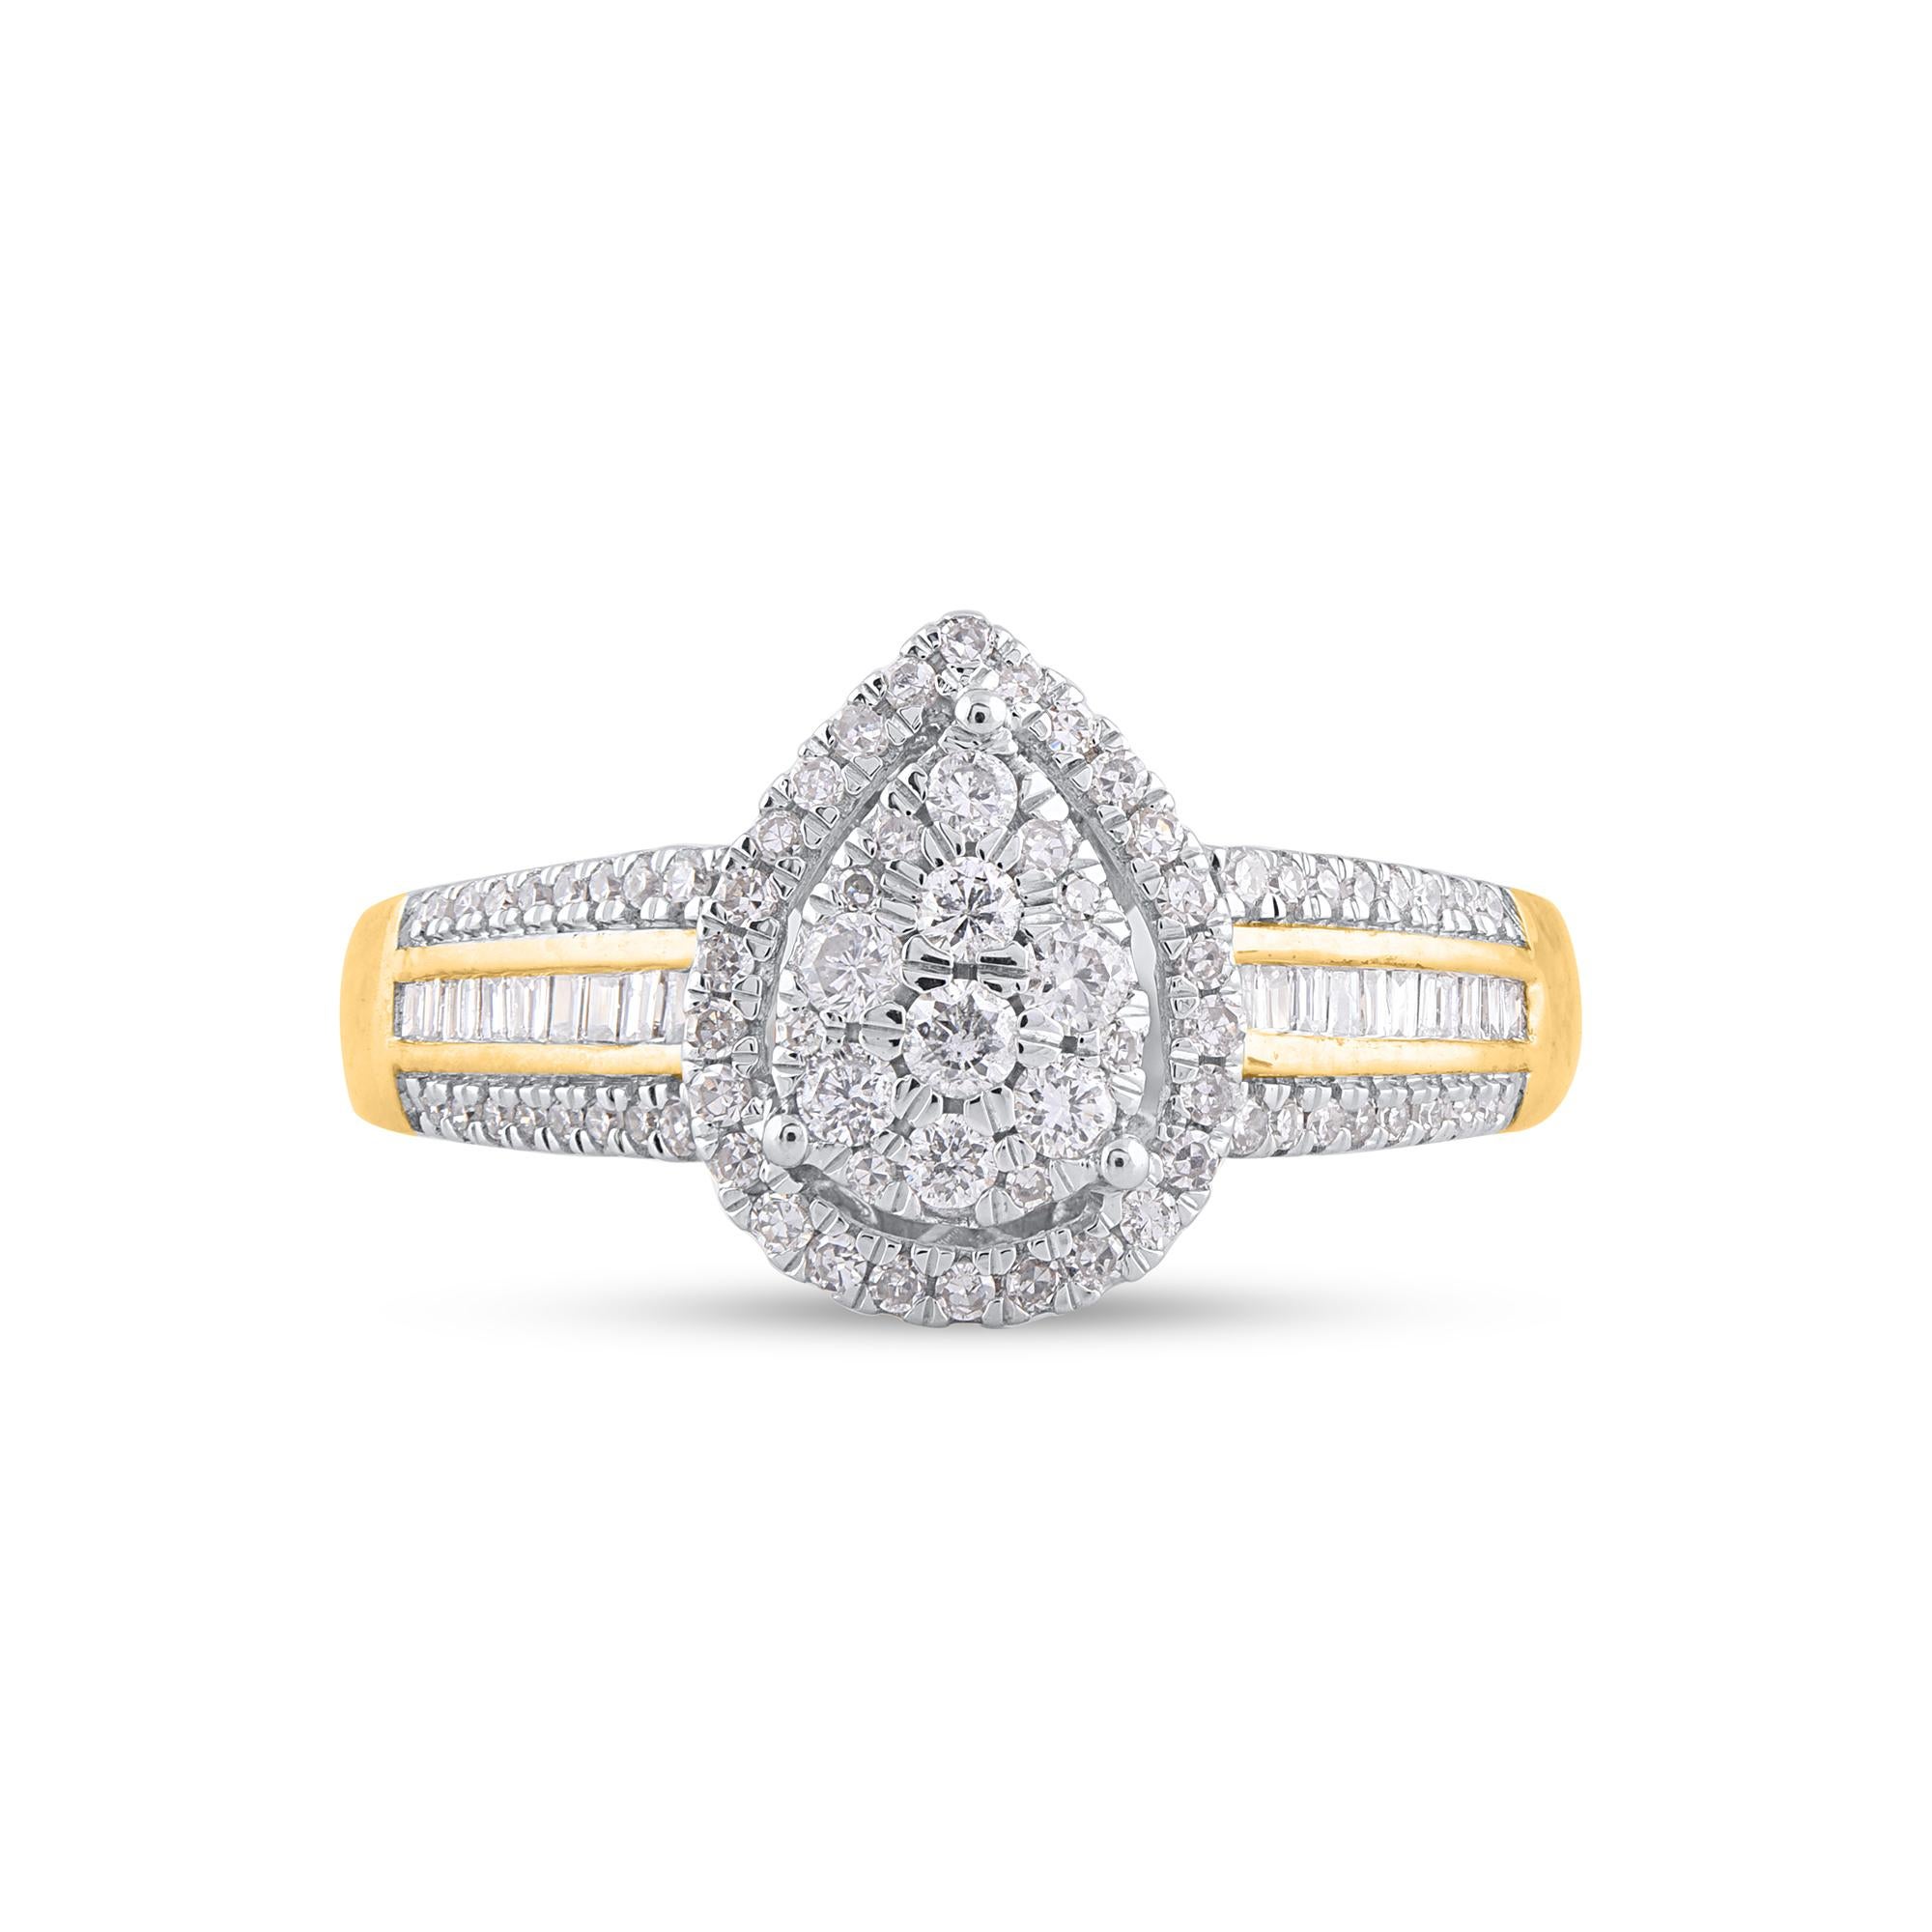 Win her heart with this classic and elegant diamond ring. The diamond ring is crafted from 14 karat yellow gold with 92 single cut, brilliant cut and baguette diamonds set in prong & channel setting, dazzles in H-I color I2 clarity and a high polish